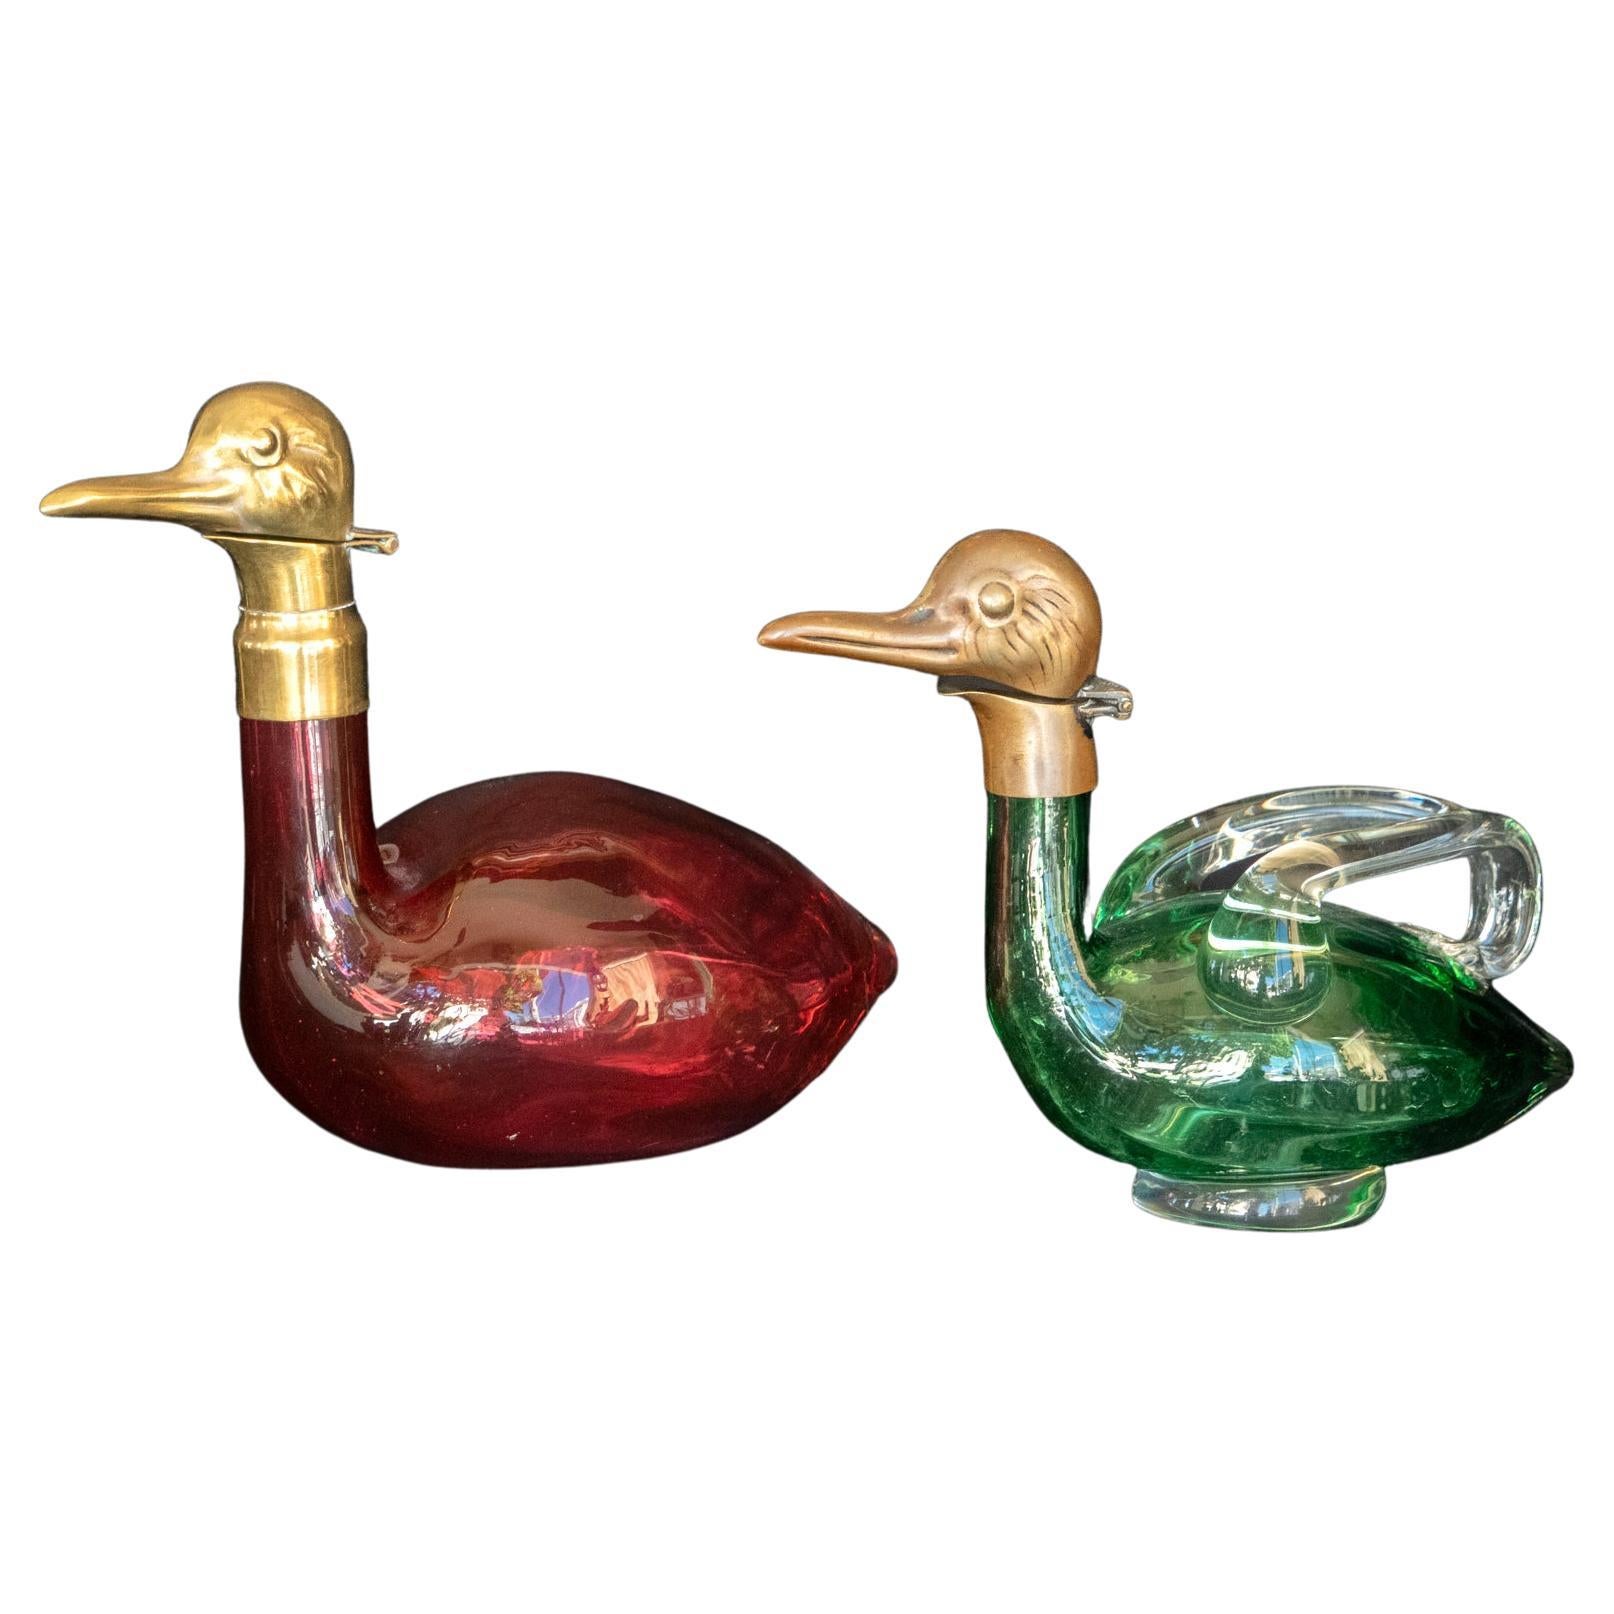 Two Early 20th Century Austrian Decanters in the Form of Ducks For Sale